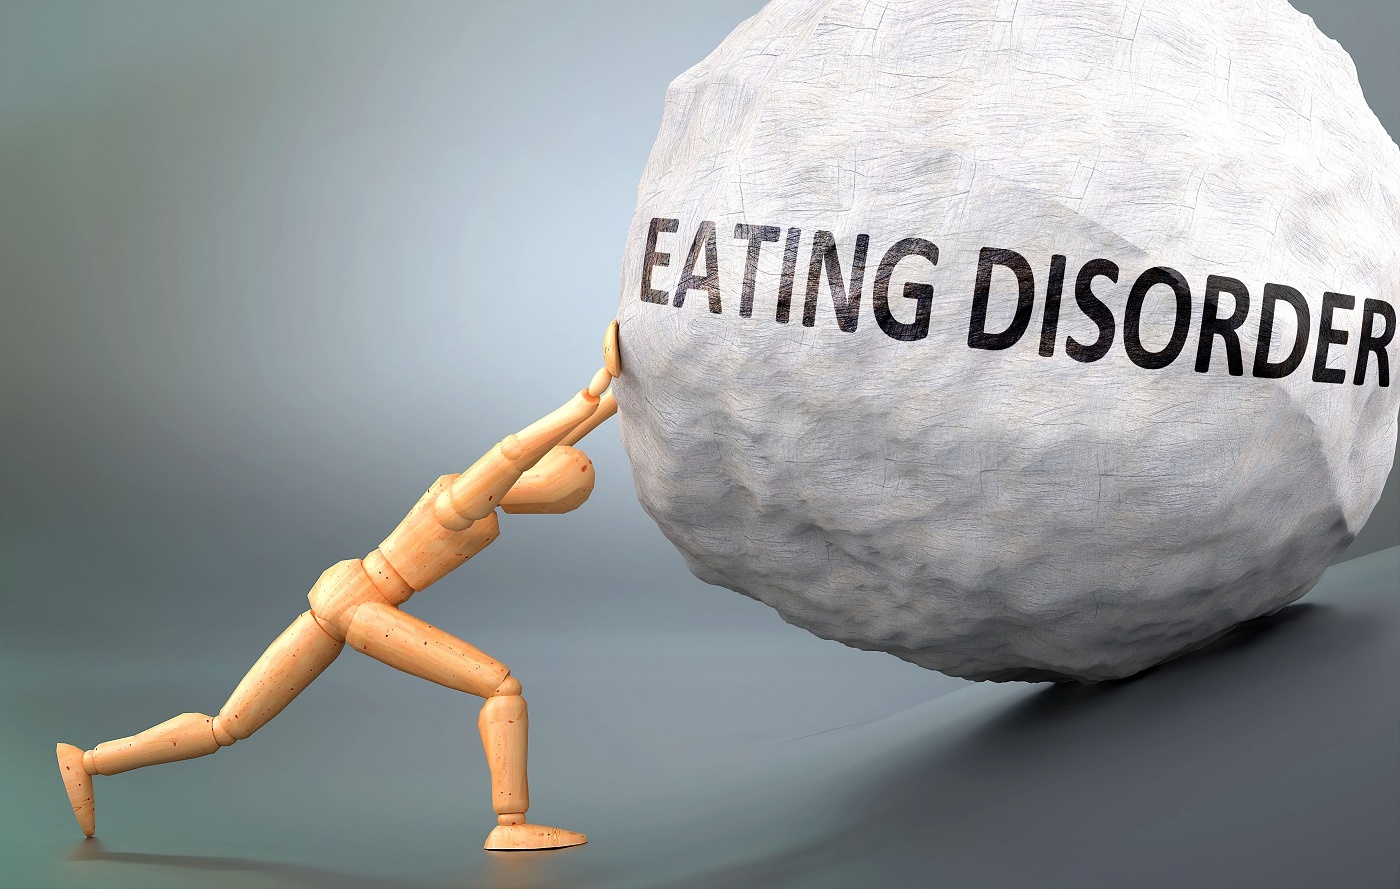 4 Treatment Options For Eating Disorders